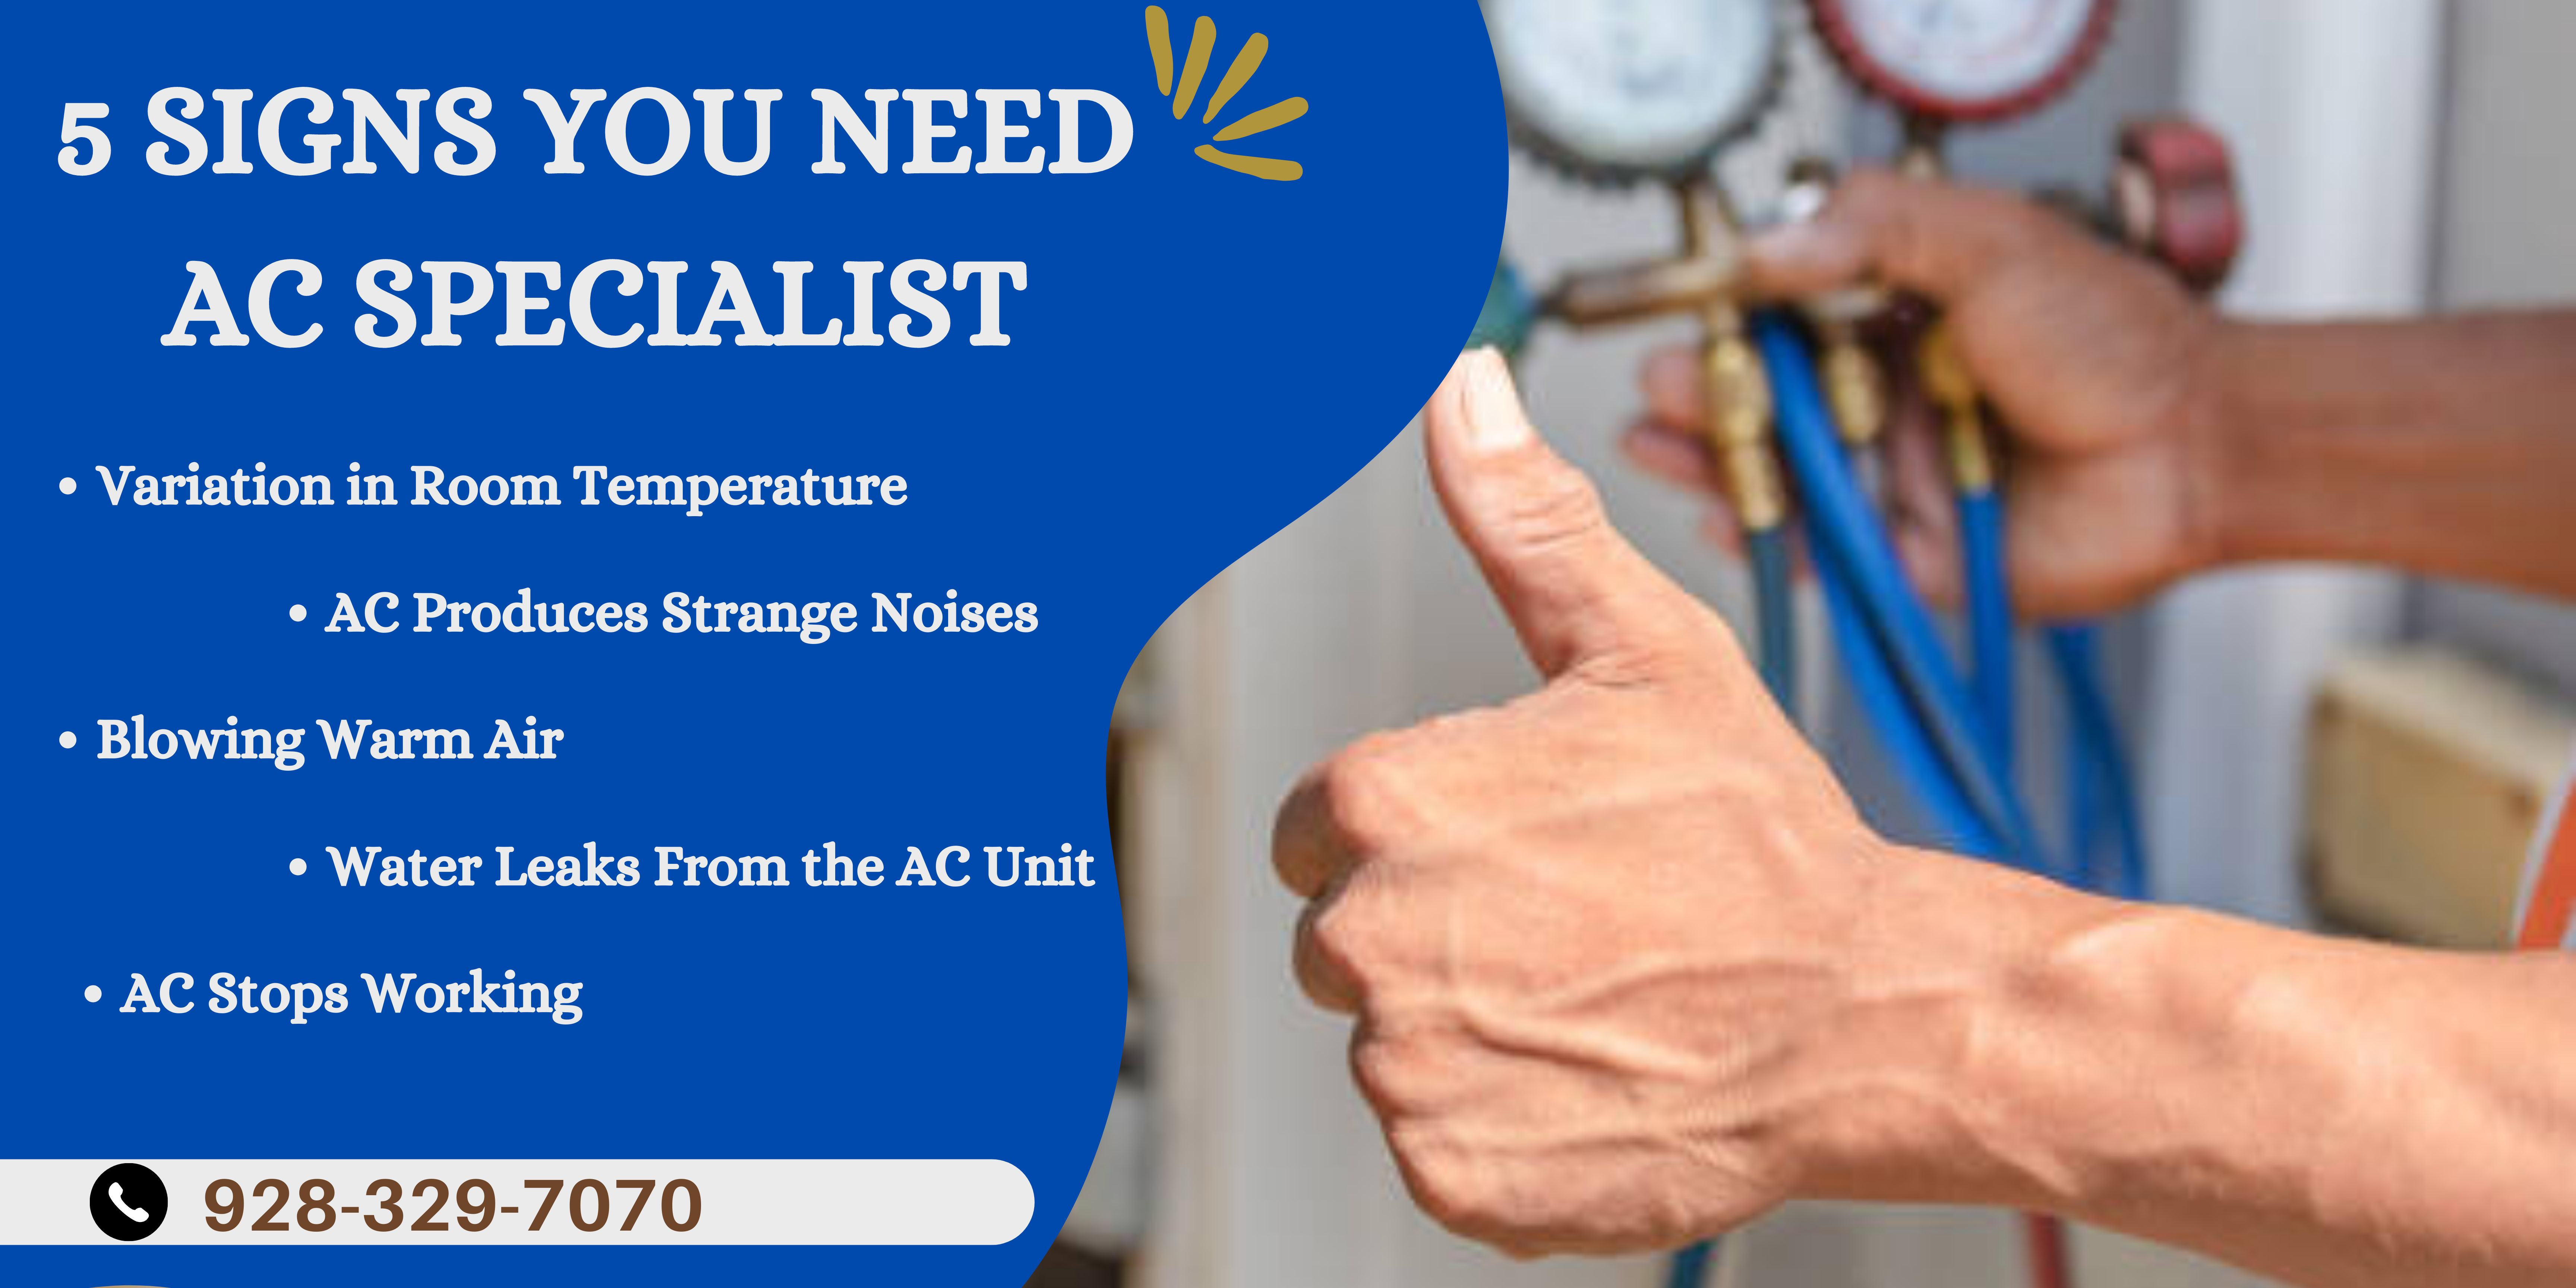 5 Signs You Need AC Specialist